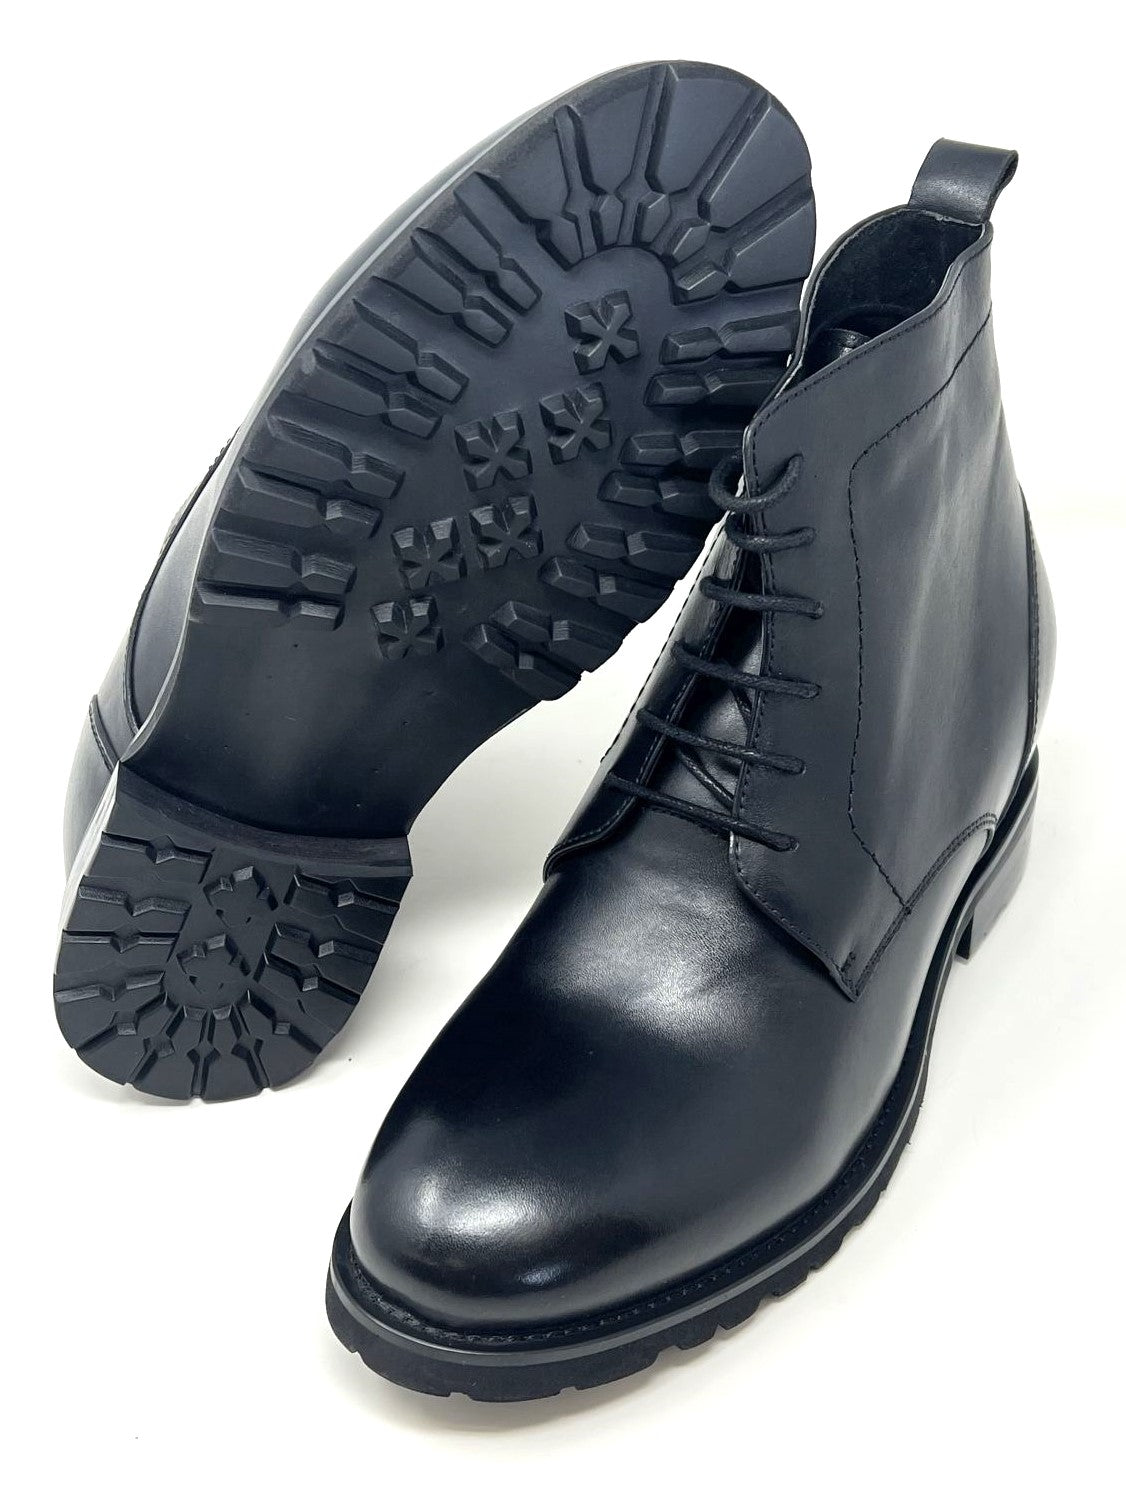 FSE0135 - 3.8 Inches Taller (Black) - Size 7.5 Only